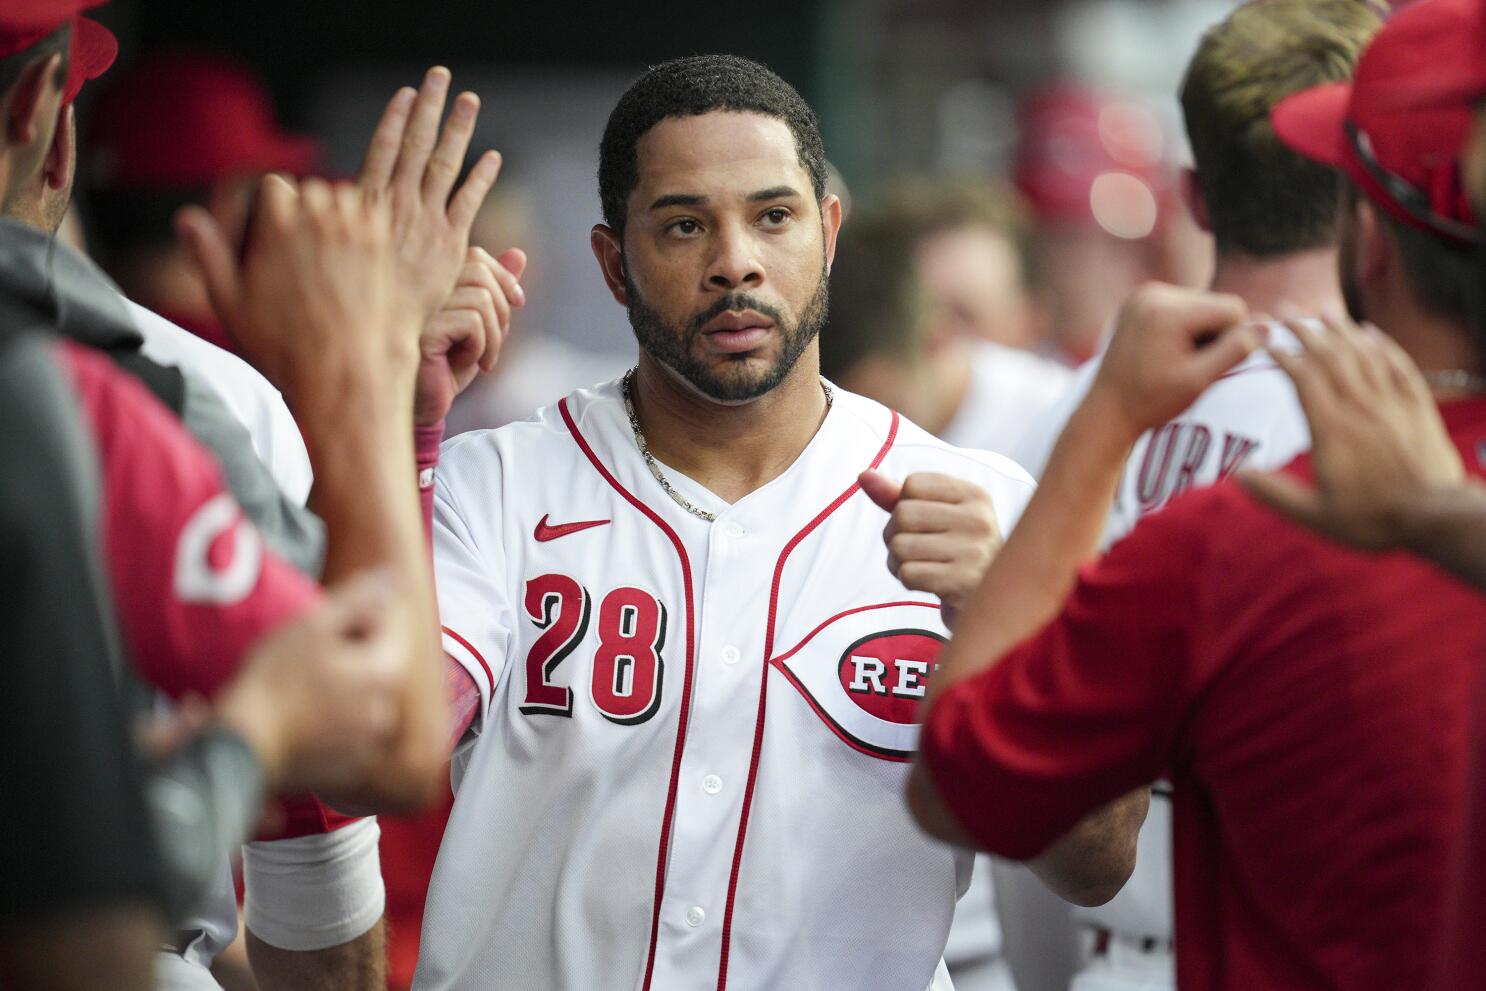 Mets sign outfielder Tommy Pham to $6 million, 1-year deal - The